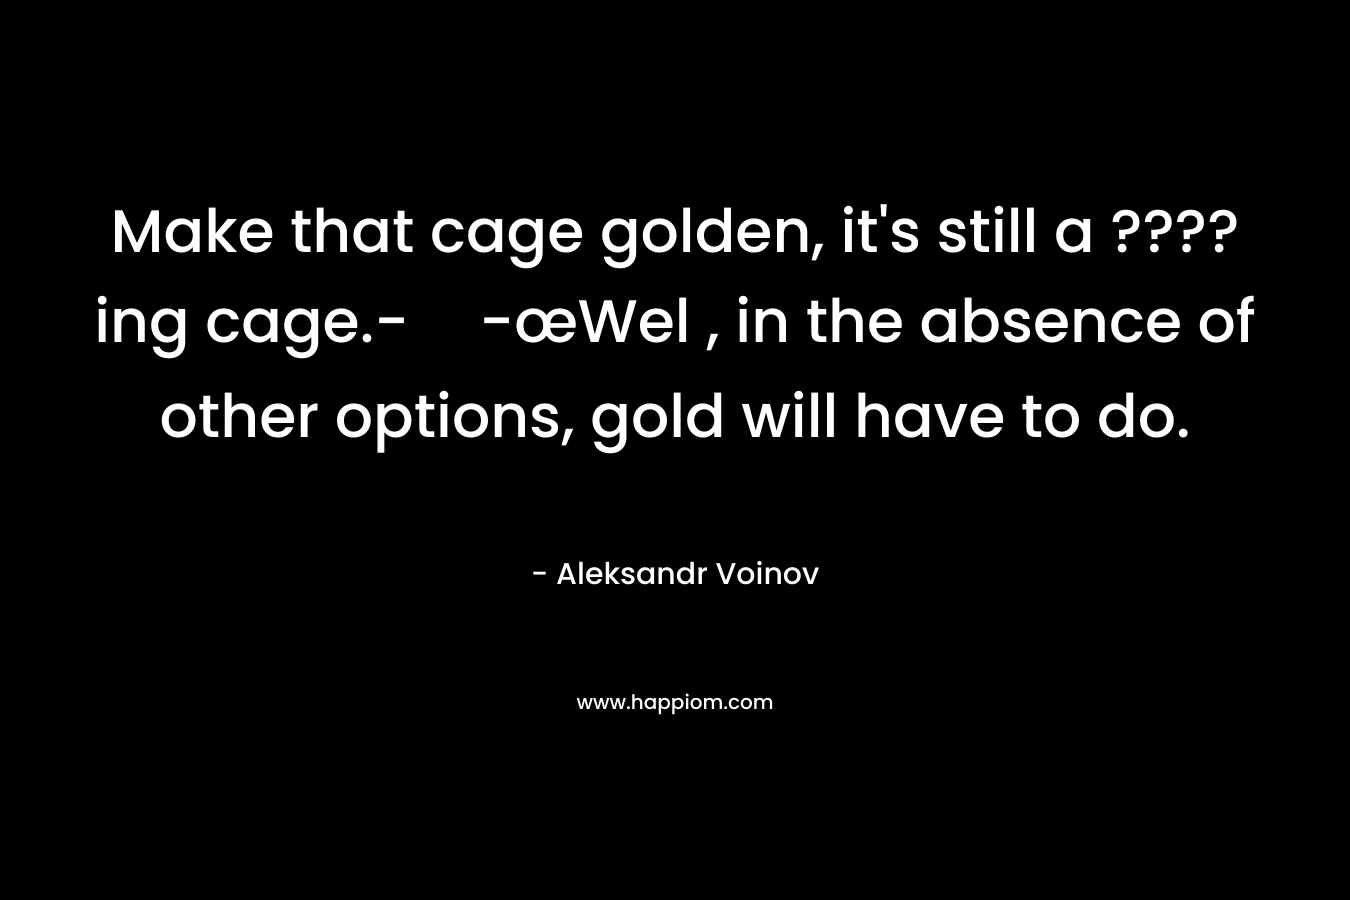 Make that cage golden, it’s still a ????ing cage.--œWel , in the absence of other options, gold will have to do. – Aleksandr Voinov